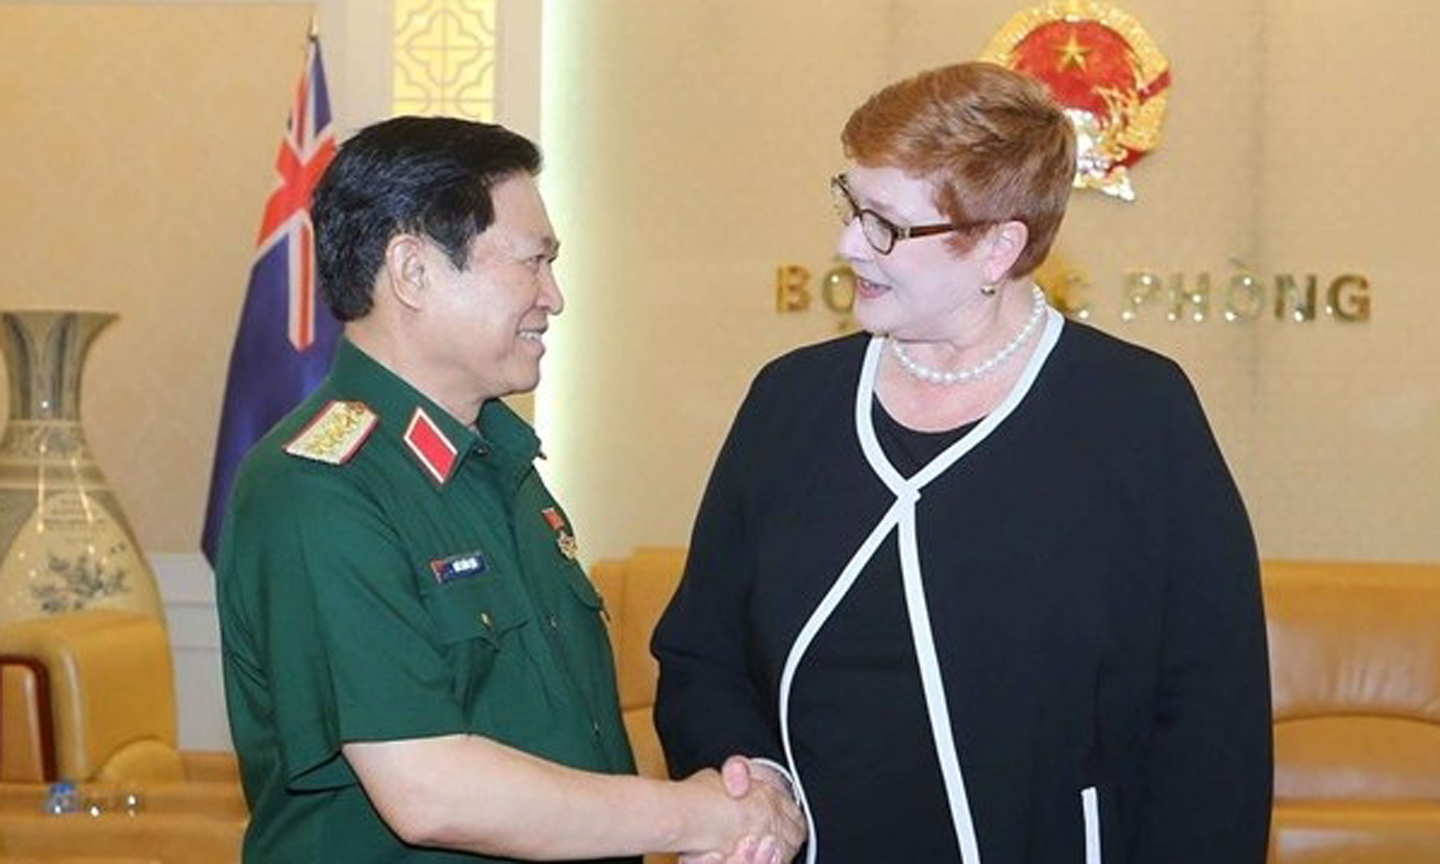  Minister of National Defence Gen. Ngo Xuan Lich (L) shakes hands with Australian Minister for Foreign Affairs Senator Marise Payne (Photo: VNA)